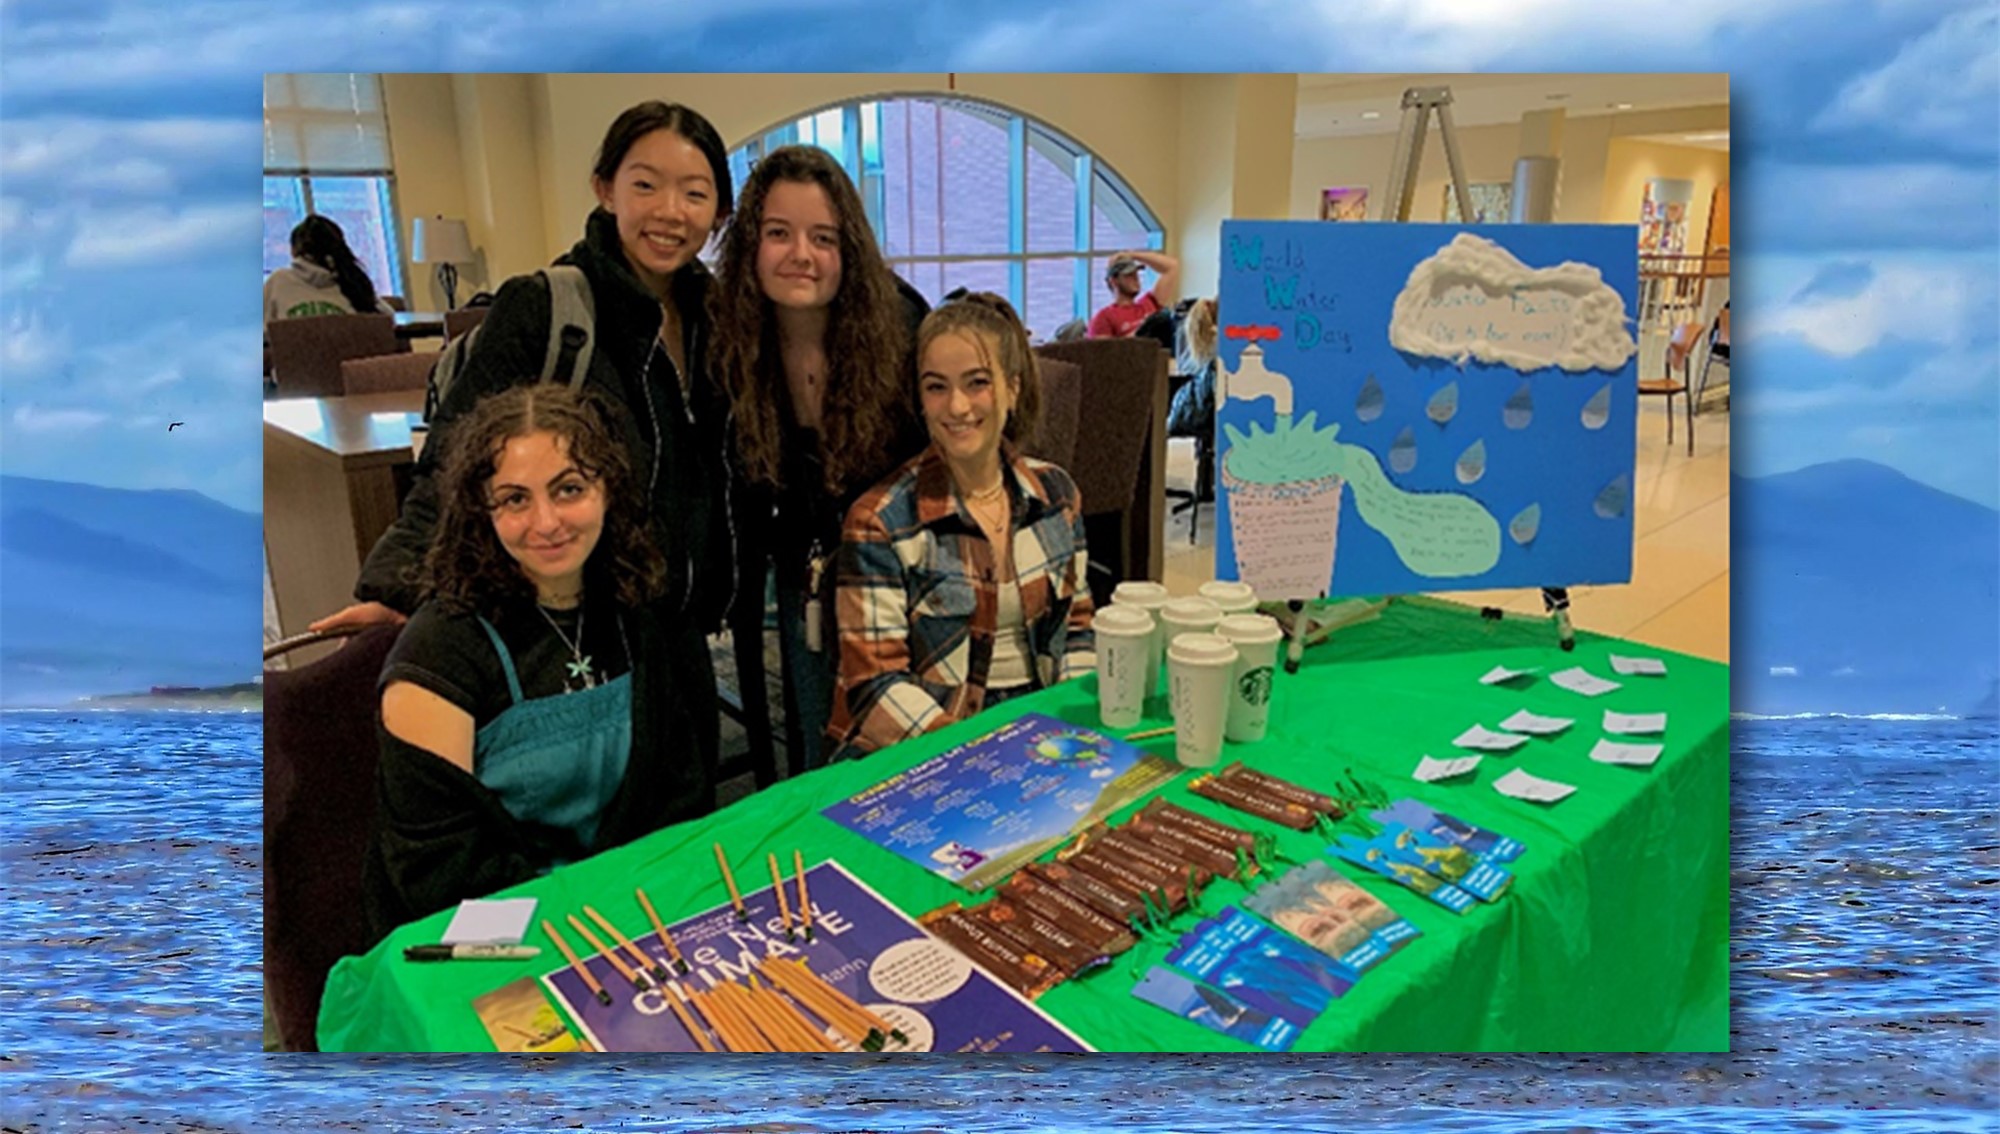 Office of Sustainability’s table for World Water Day; pictured left to right: Karla Shaffer, Emily Burgers, Emma Warras, Angela Hudock. Pictured in the photo below: ARAMARK’s table for World Water Day, left to right: Alex Ferrador and Cayman Webber 